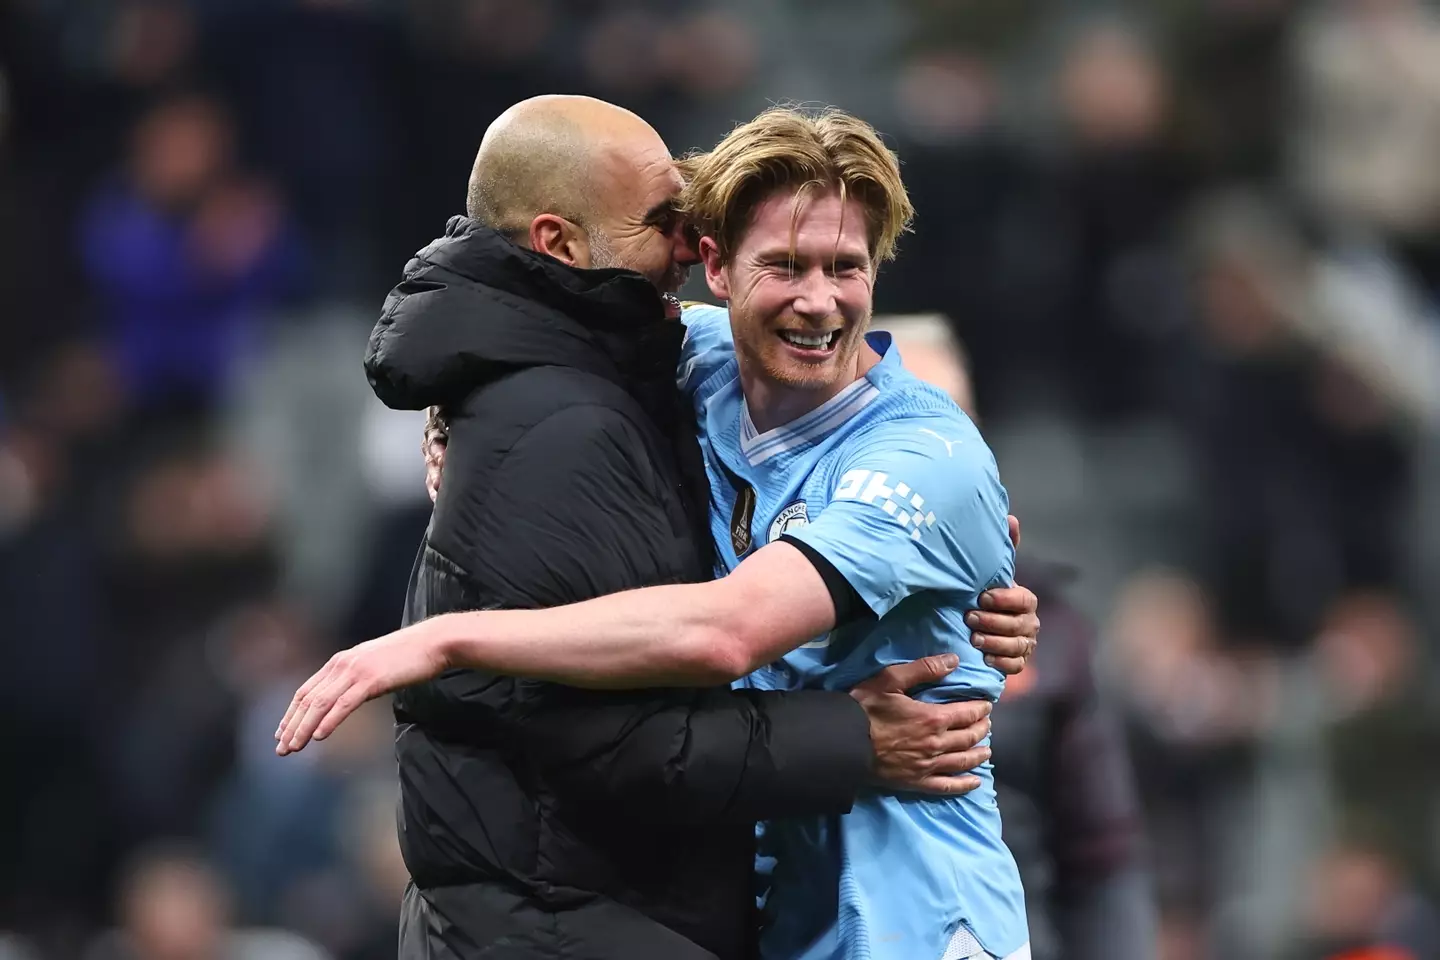 Kevin De Bruyne celebrates with Pep Guardiola after the final whistle. Image: Getty